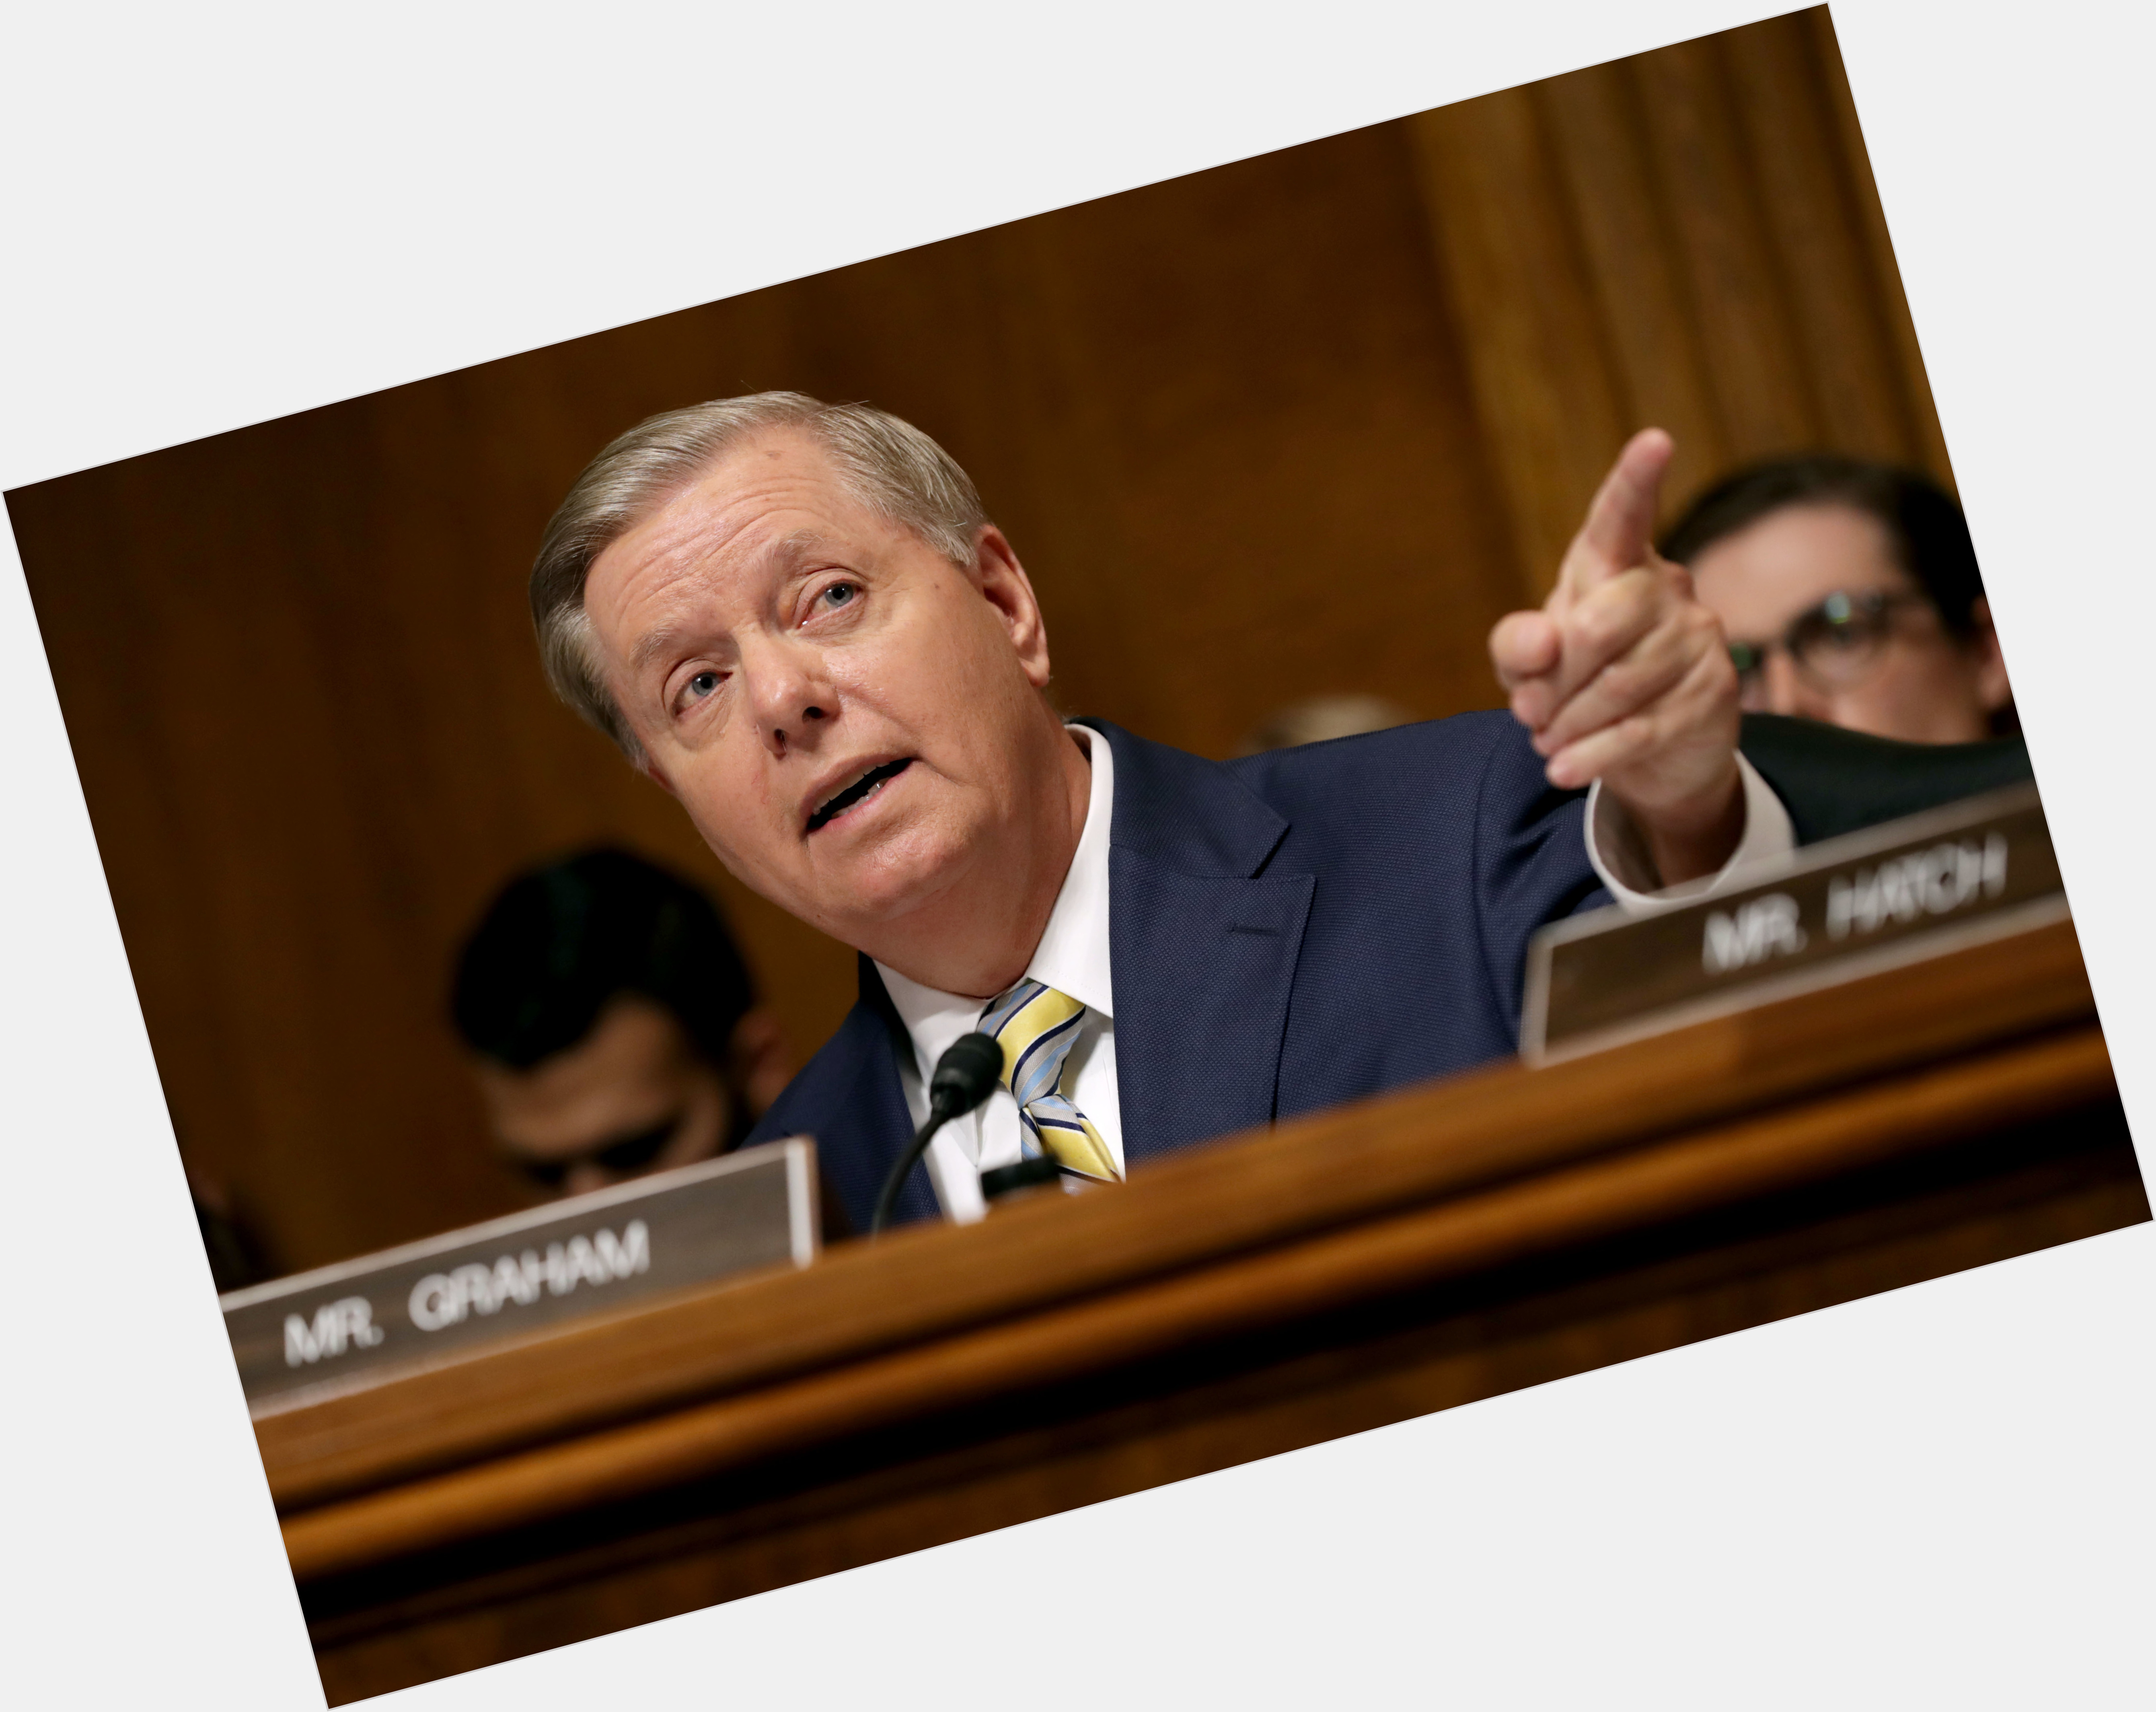 <a href="/hot-men/lindsey-graham/is-he-married-chairperson-committee-queer-christian-mason">Lindsey Graham</a> Slim body,  grey hair & hairstyles